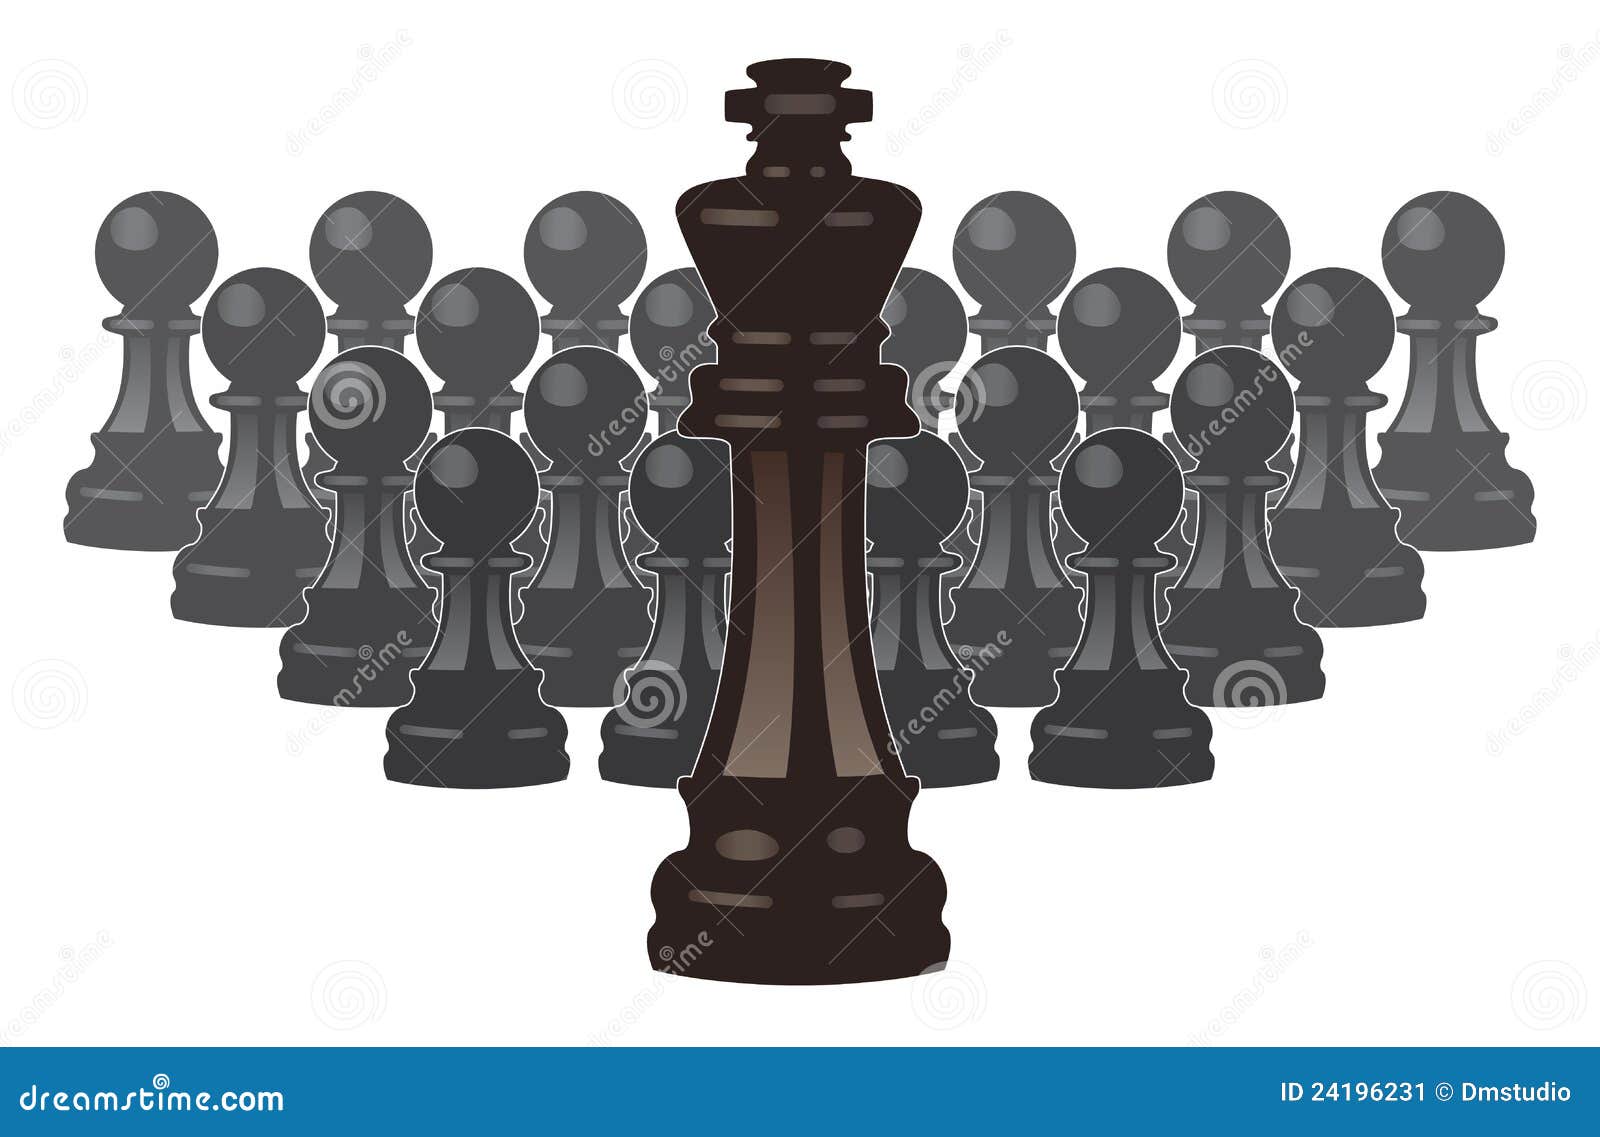 Two chess pawns Royalty Free Vector Image - VectorStock